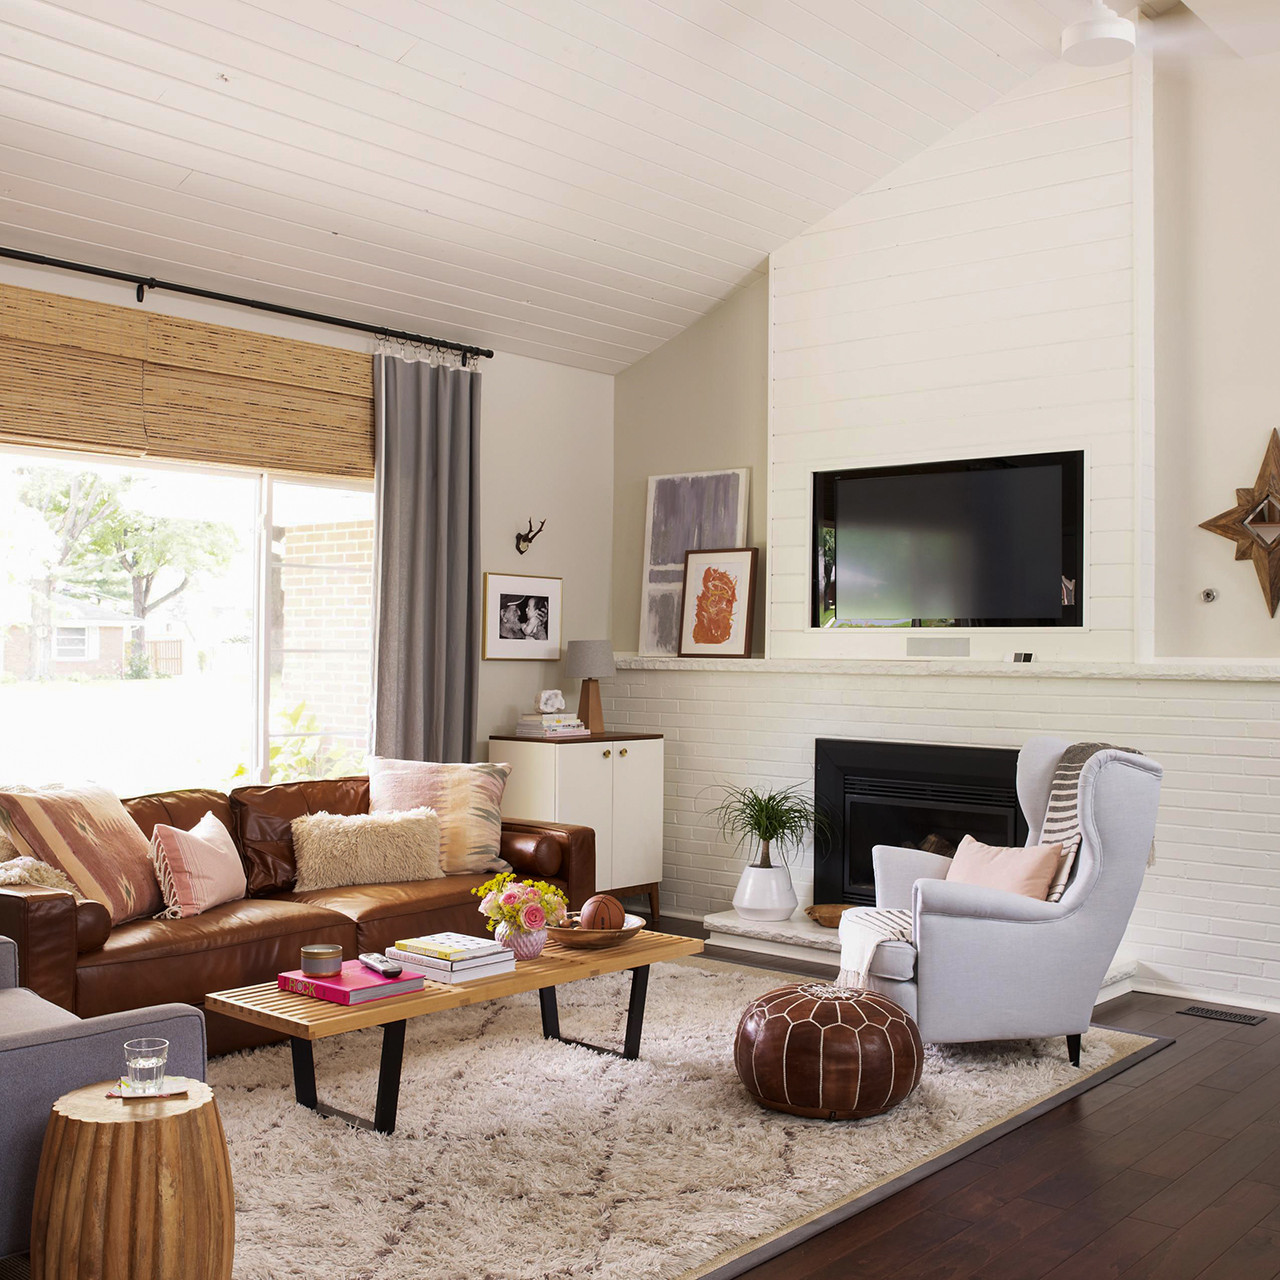 Brown Furniture Living Room Ideas
 Our Favorite Ways to Decorate with a Brown Sofa